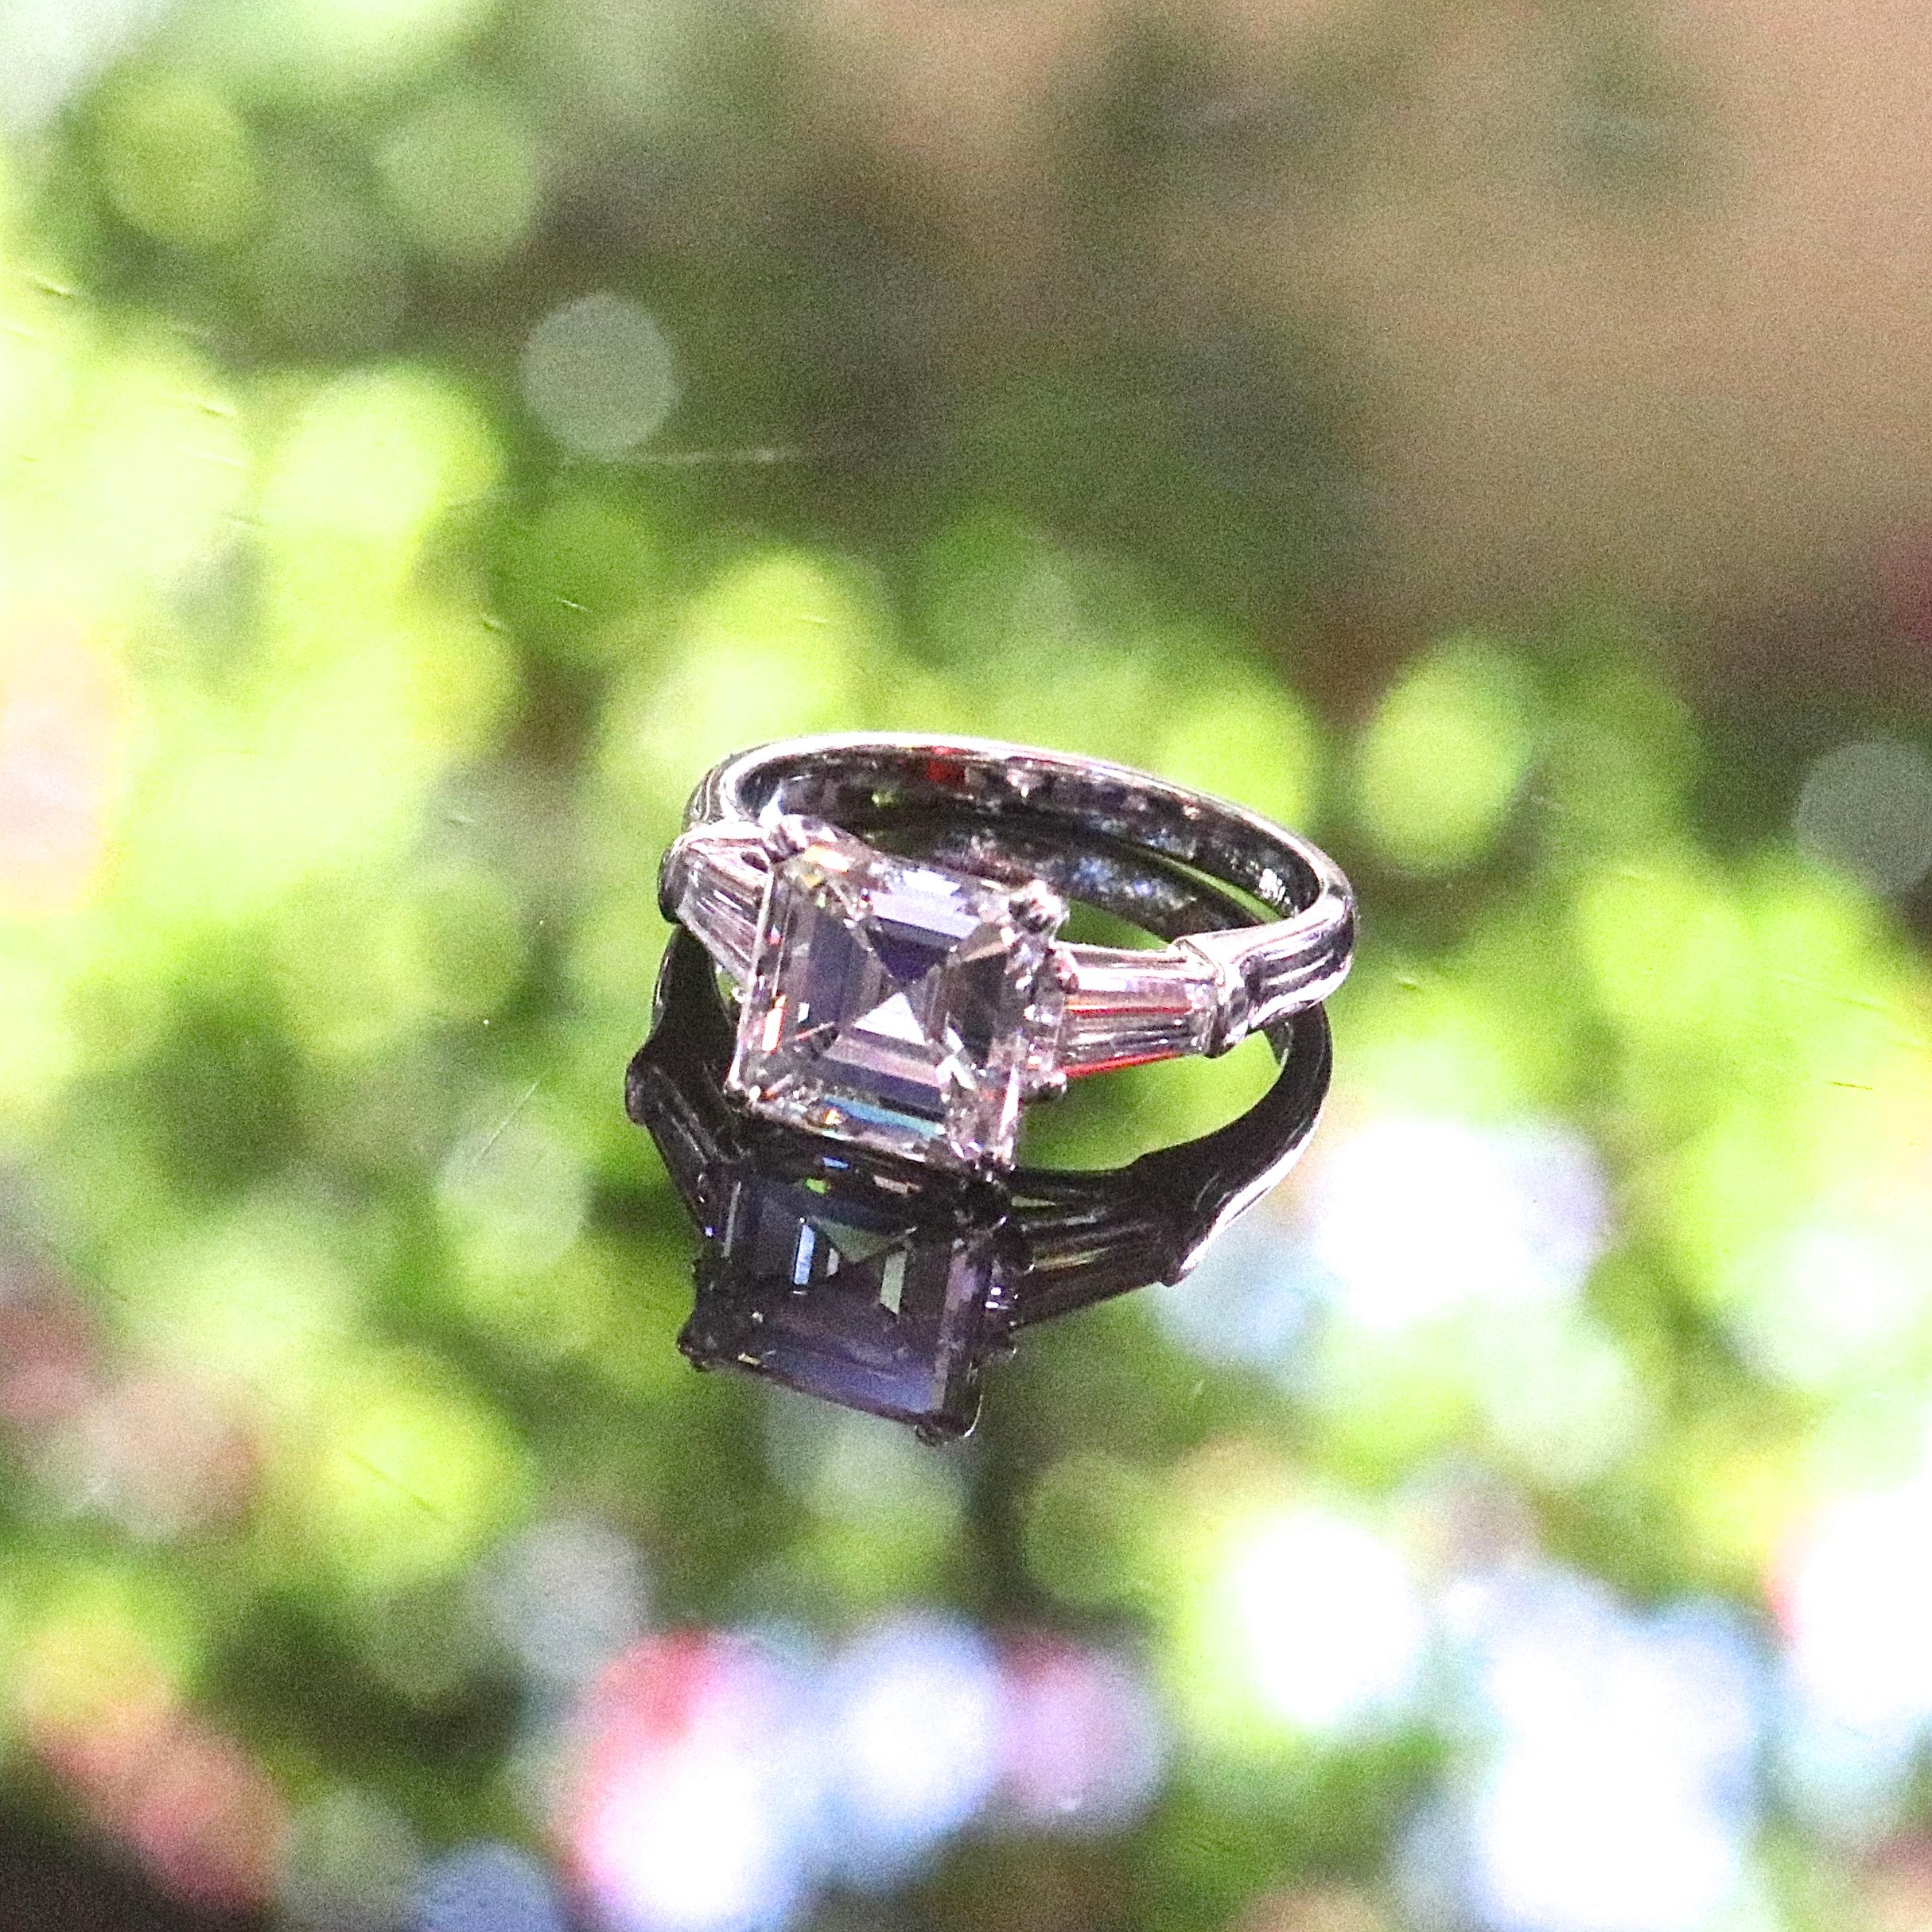 A perfect emerald cut diamond makes for the most beautiful engagement ring. Featuring a 1950's GIA 2.38 carat, J color, VS2 clarity emerald cut diamond. With 2 baguette cut diamonds that weigh approximately 0.25 carats, graded F-G color, VS clarity.